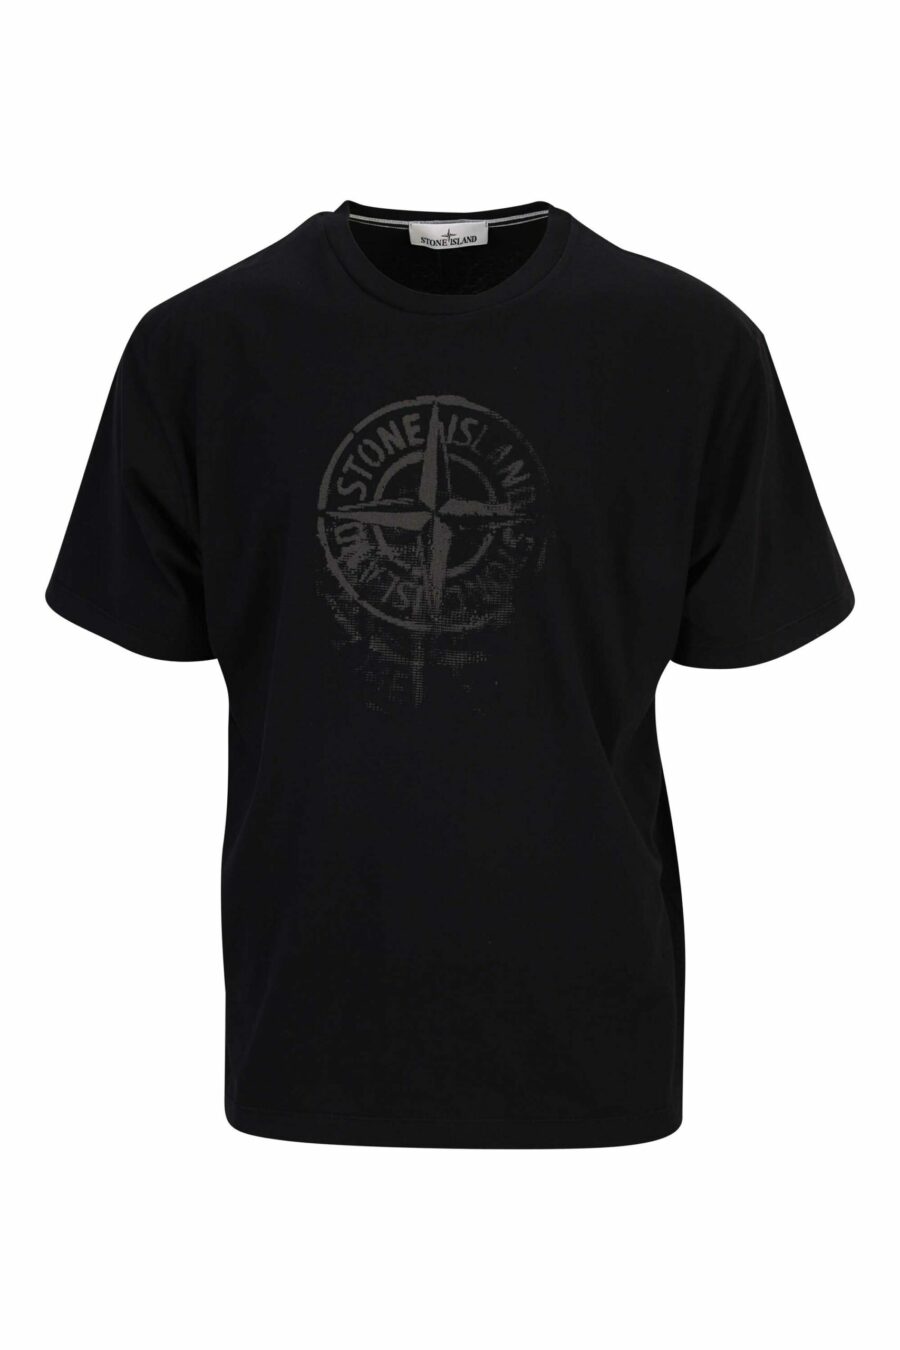 Black T-shirt with compass maxilogo - 8052572907272 scaled